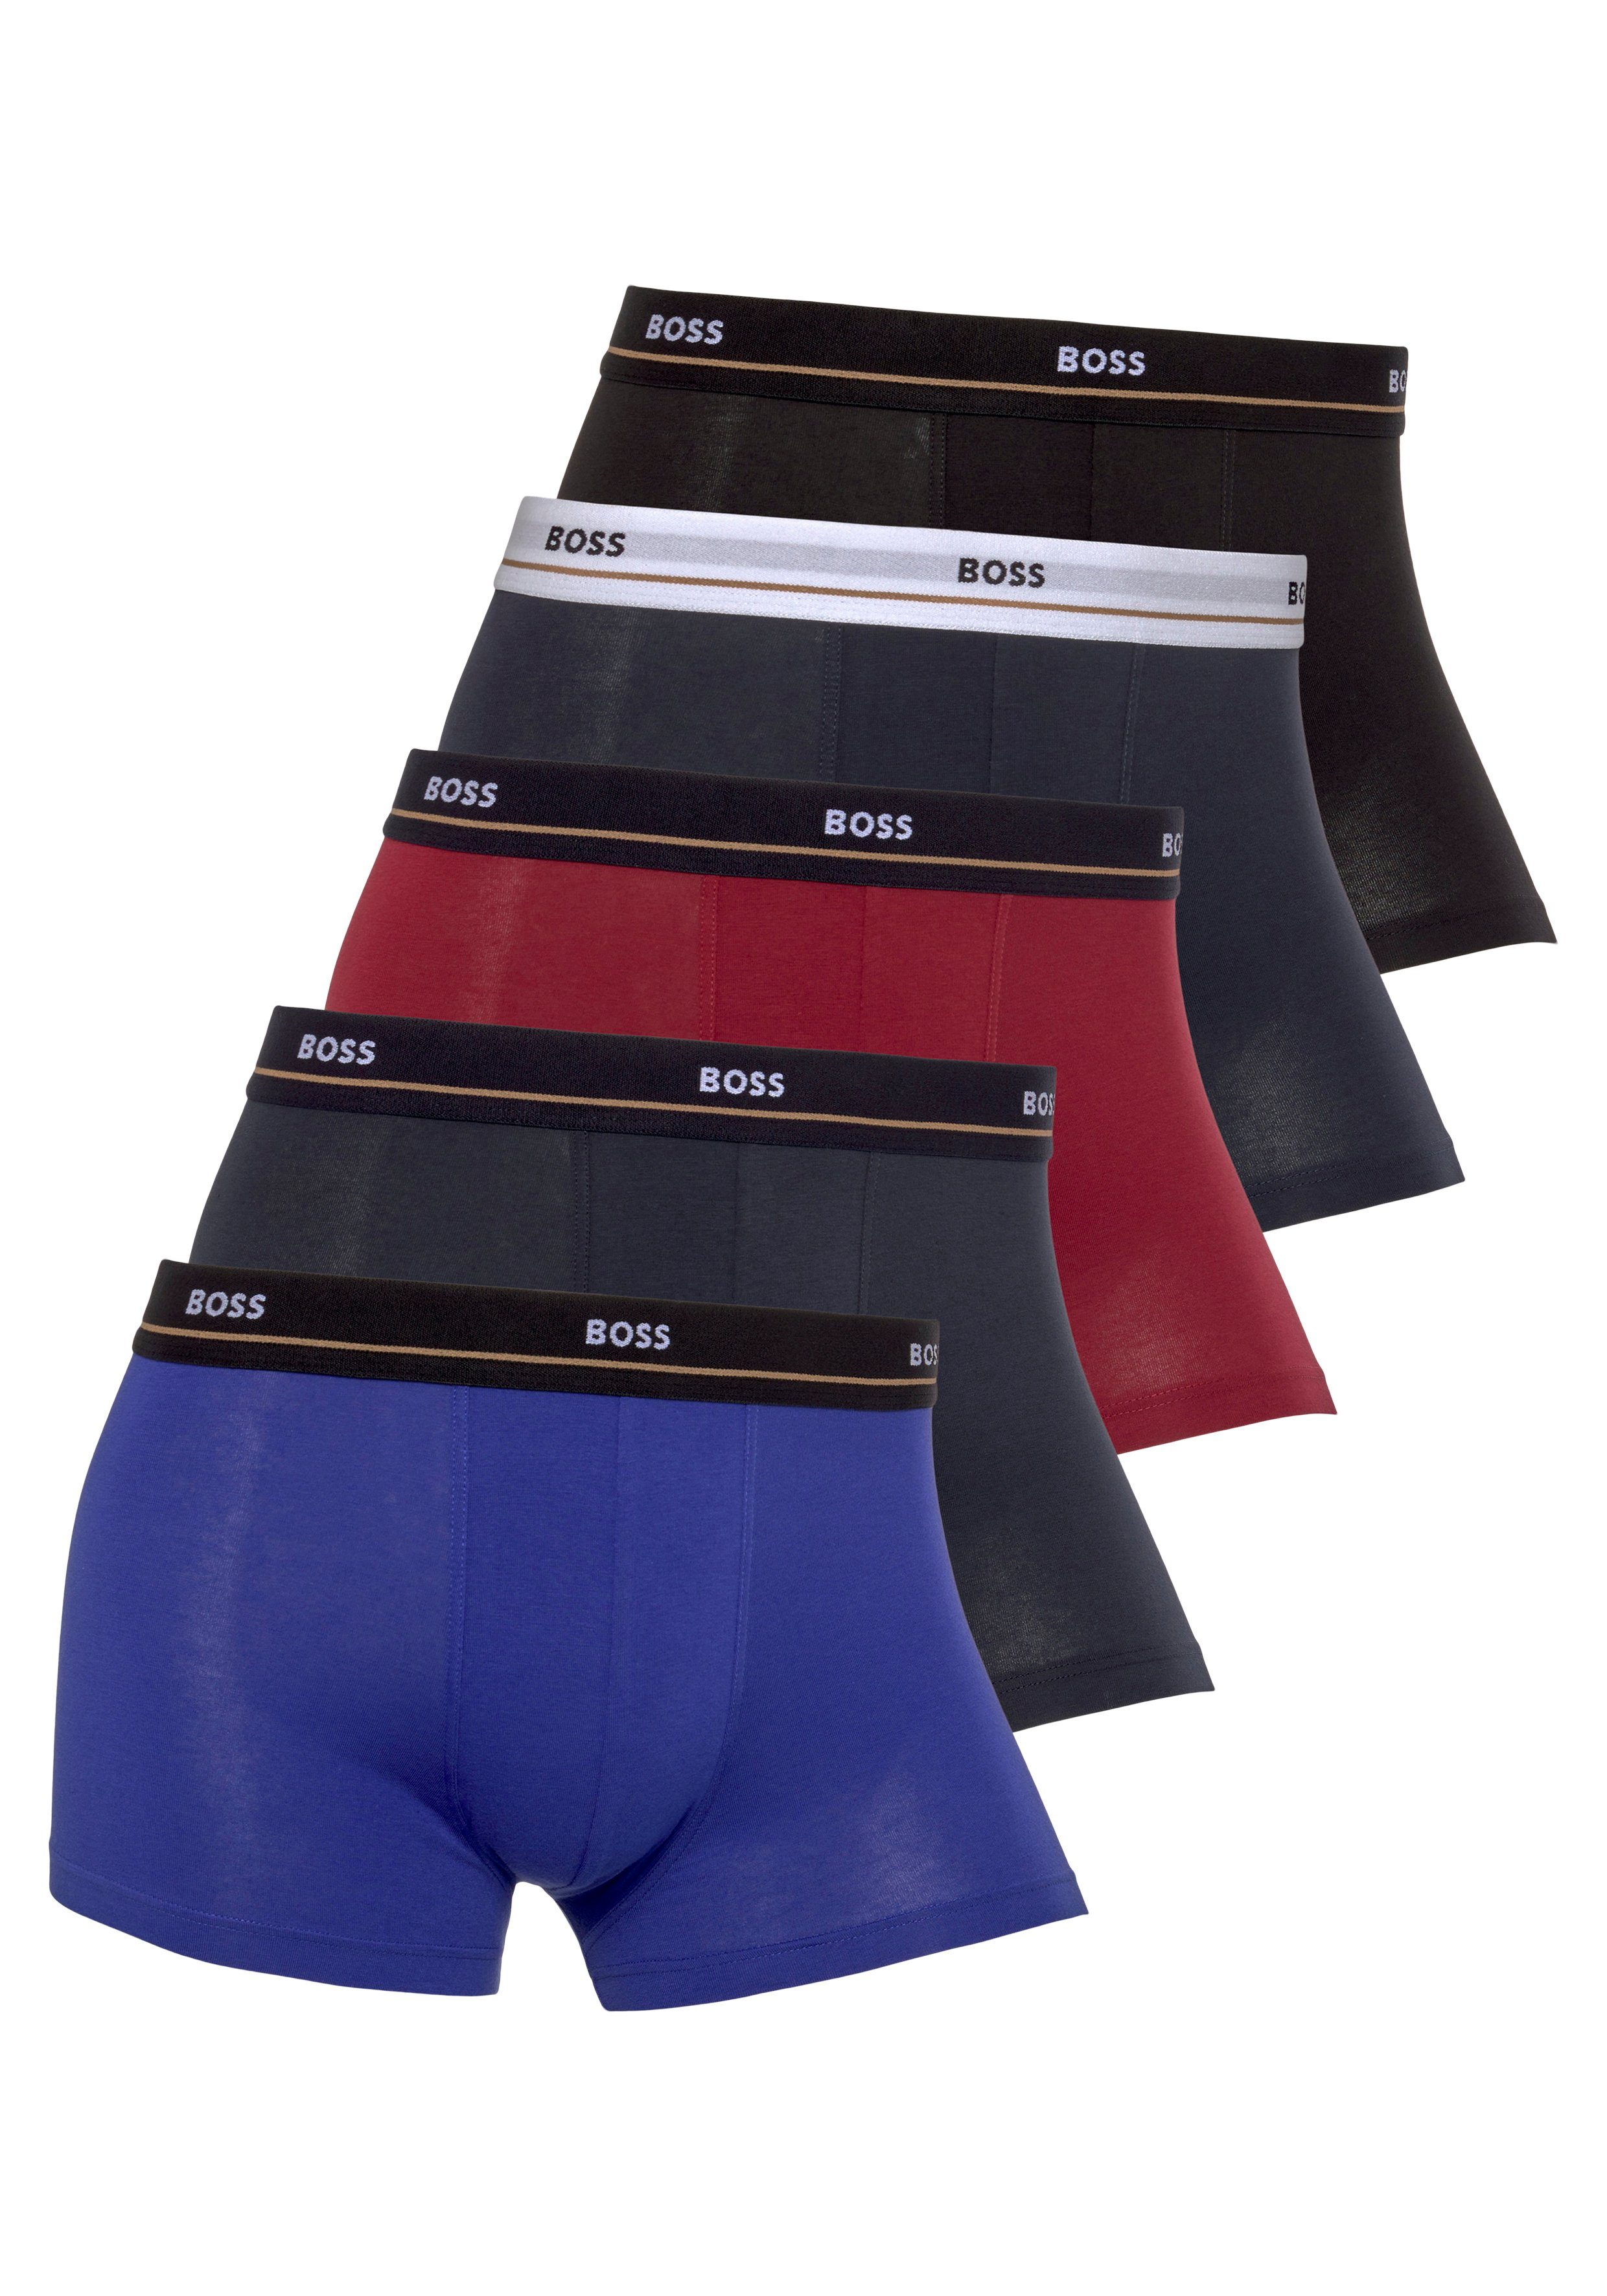 BOSS Trunk Trunk 5P Essential (Packung, 5-St., 5er Pack) mit Logobund Open-Miscellaneous | Boxershorts